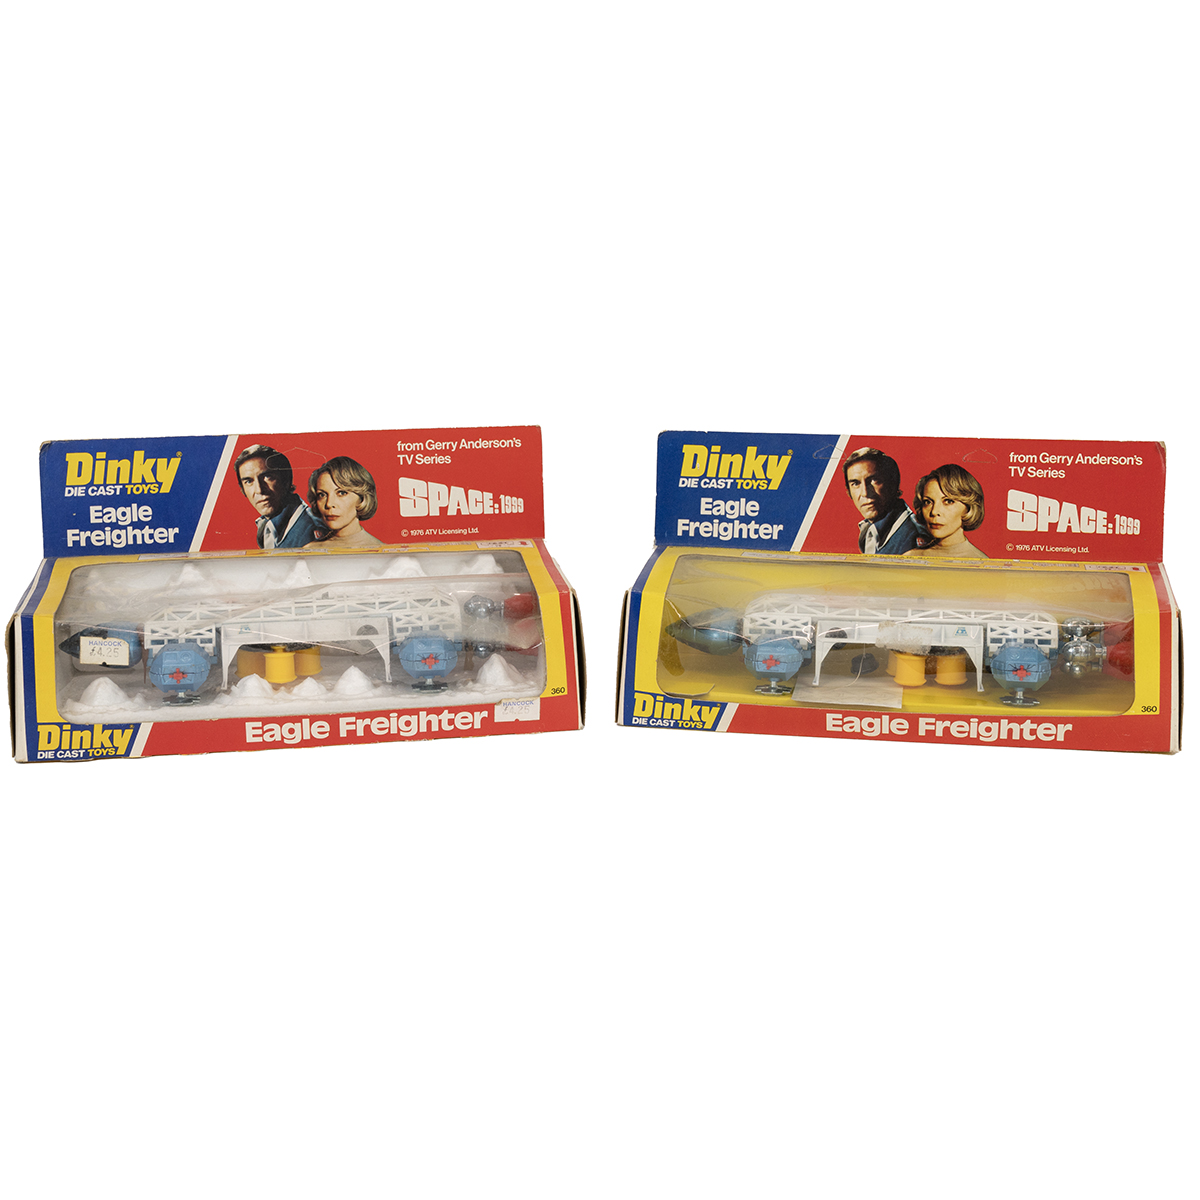 Two new in box Dinky Eagle Freighter Toy vehicles. No.360 from Space:1999 c1976. (2)